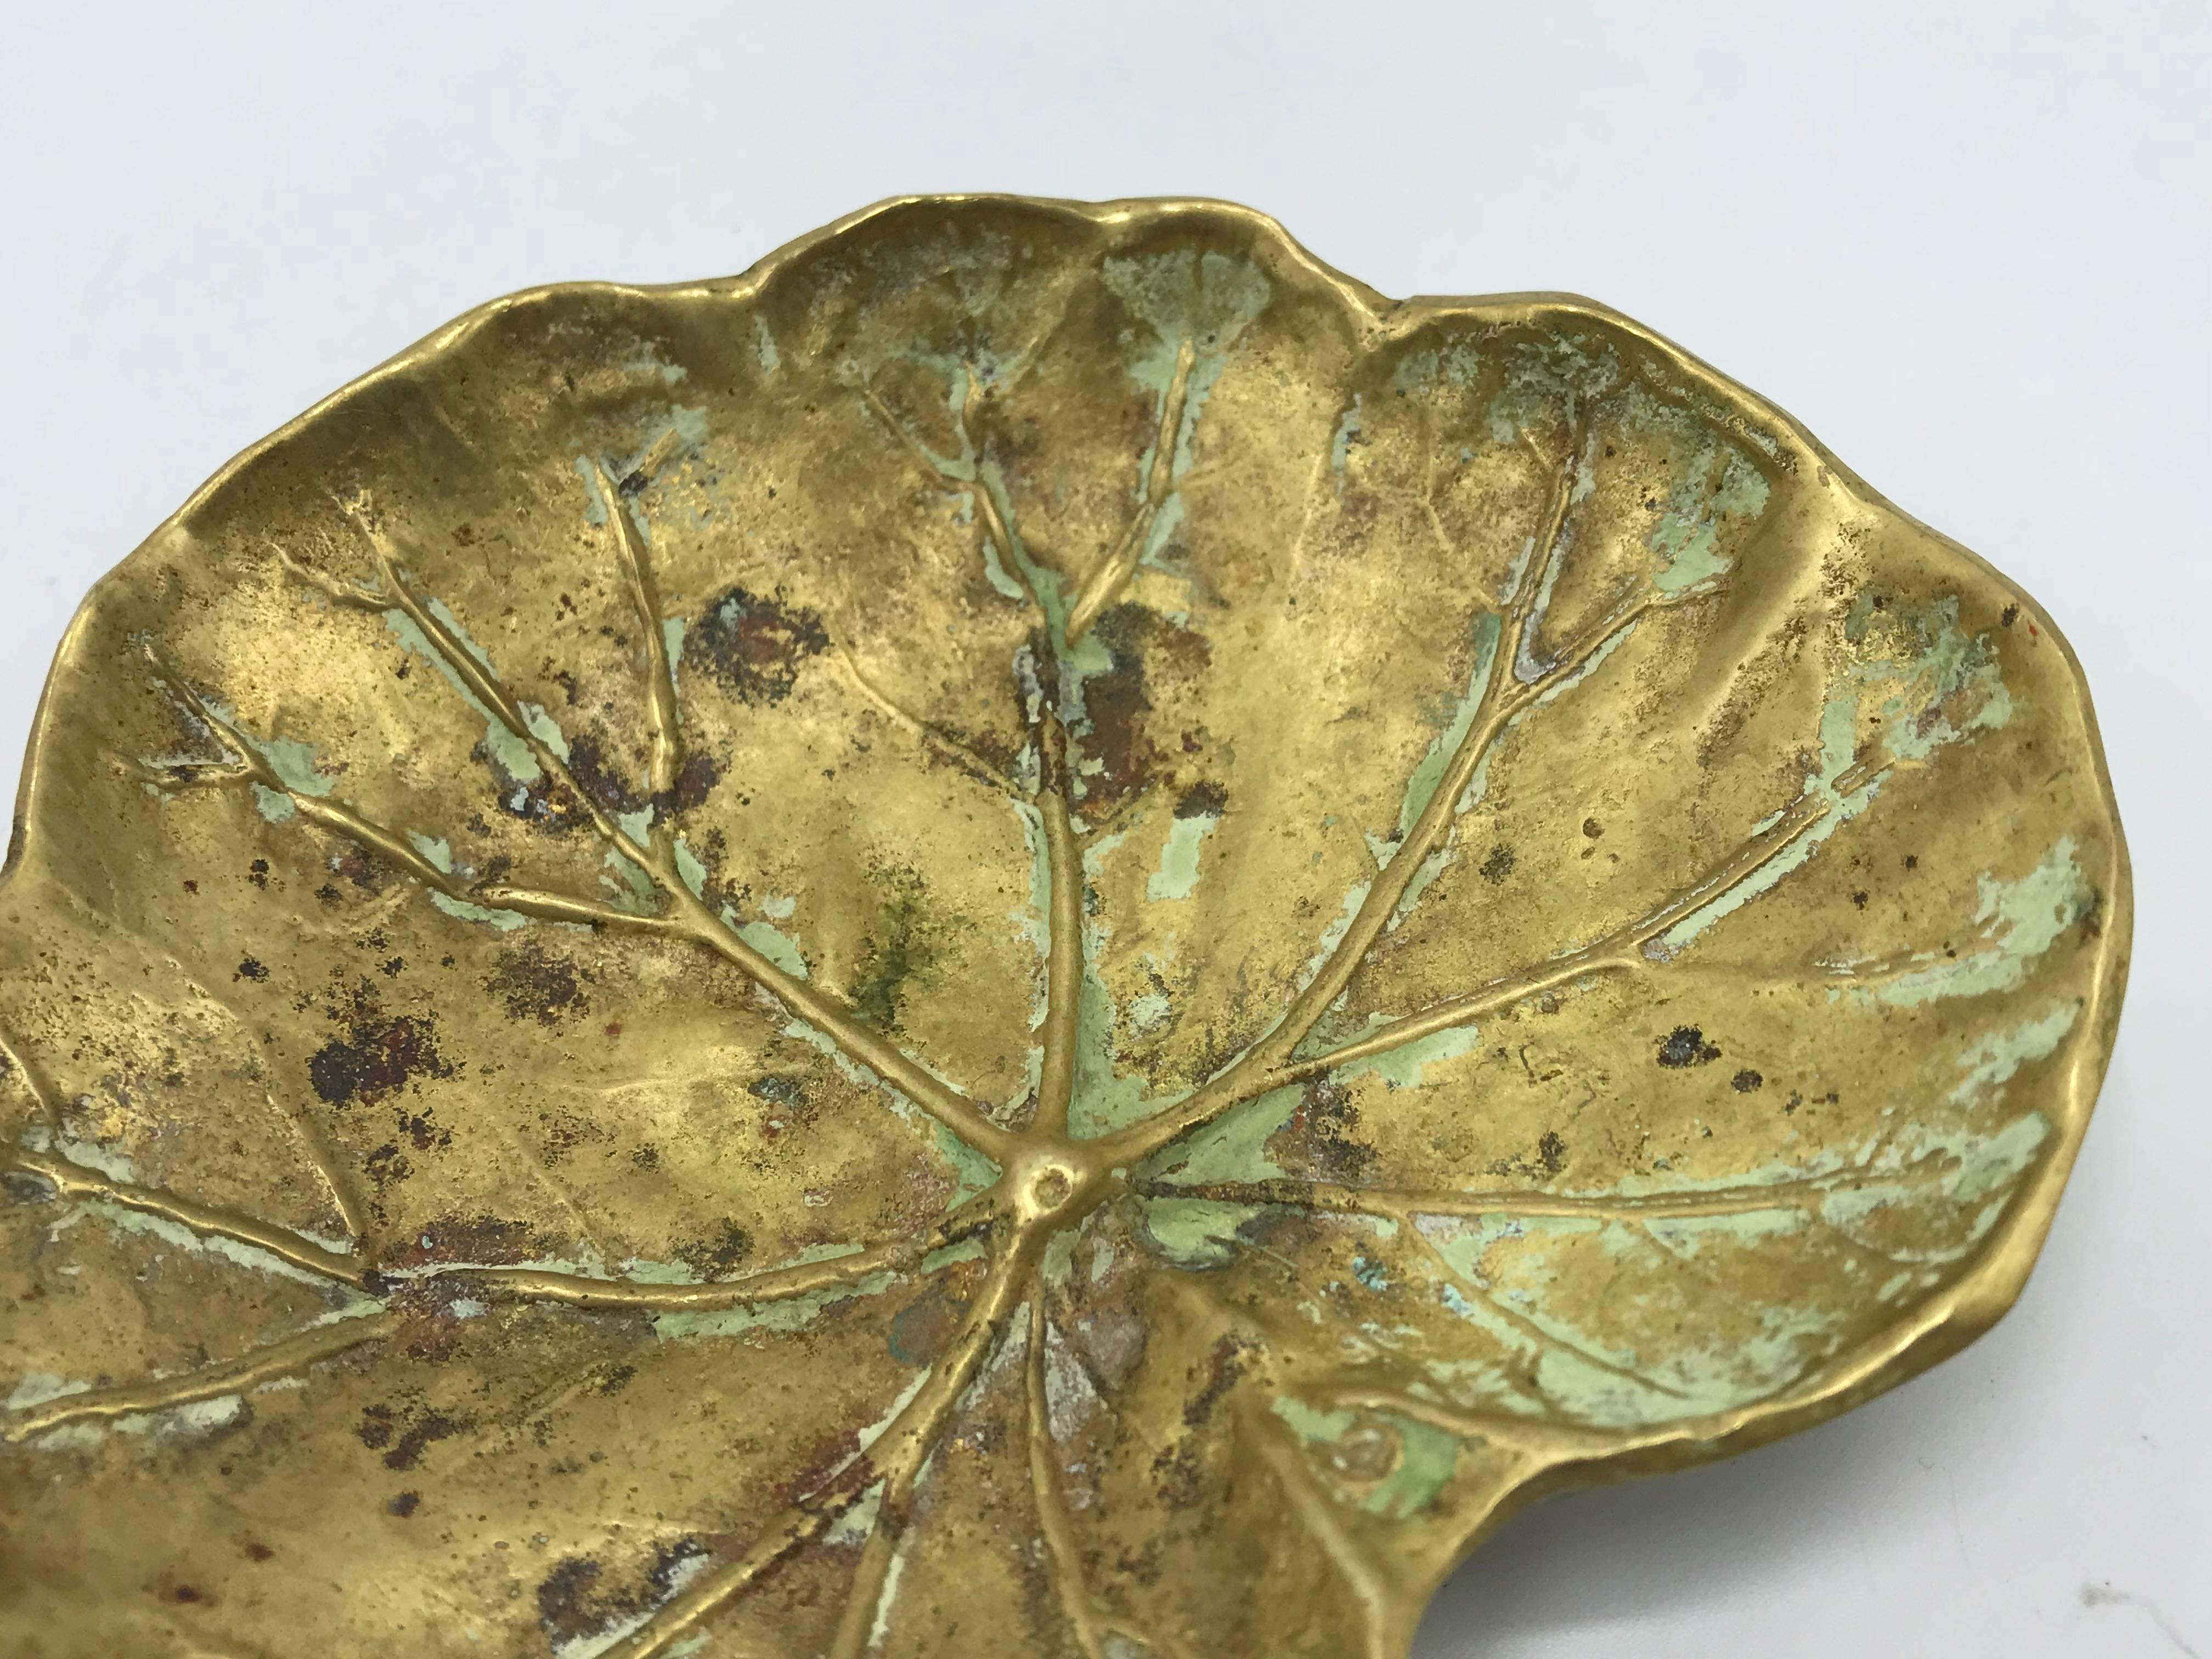 Offered is a stunning, 1948, Virginia Metalcrafters solid-brass geranium sculpture. Marked on backside with Virginia Metalcrafters signature 'VMC' stamp, see last photo. Heavy. Beautiful all-over patina, can be polished by buyer.

“Since 1890, the